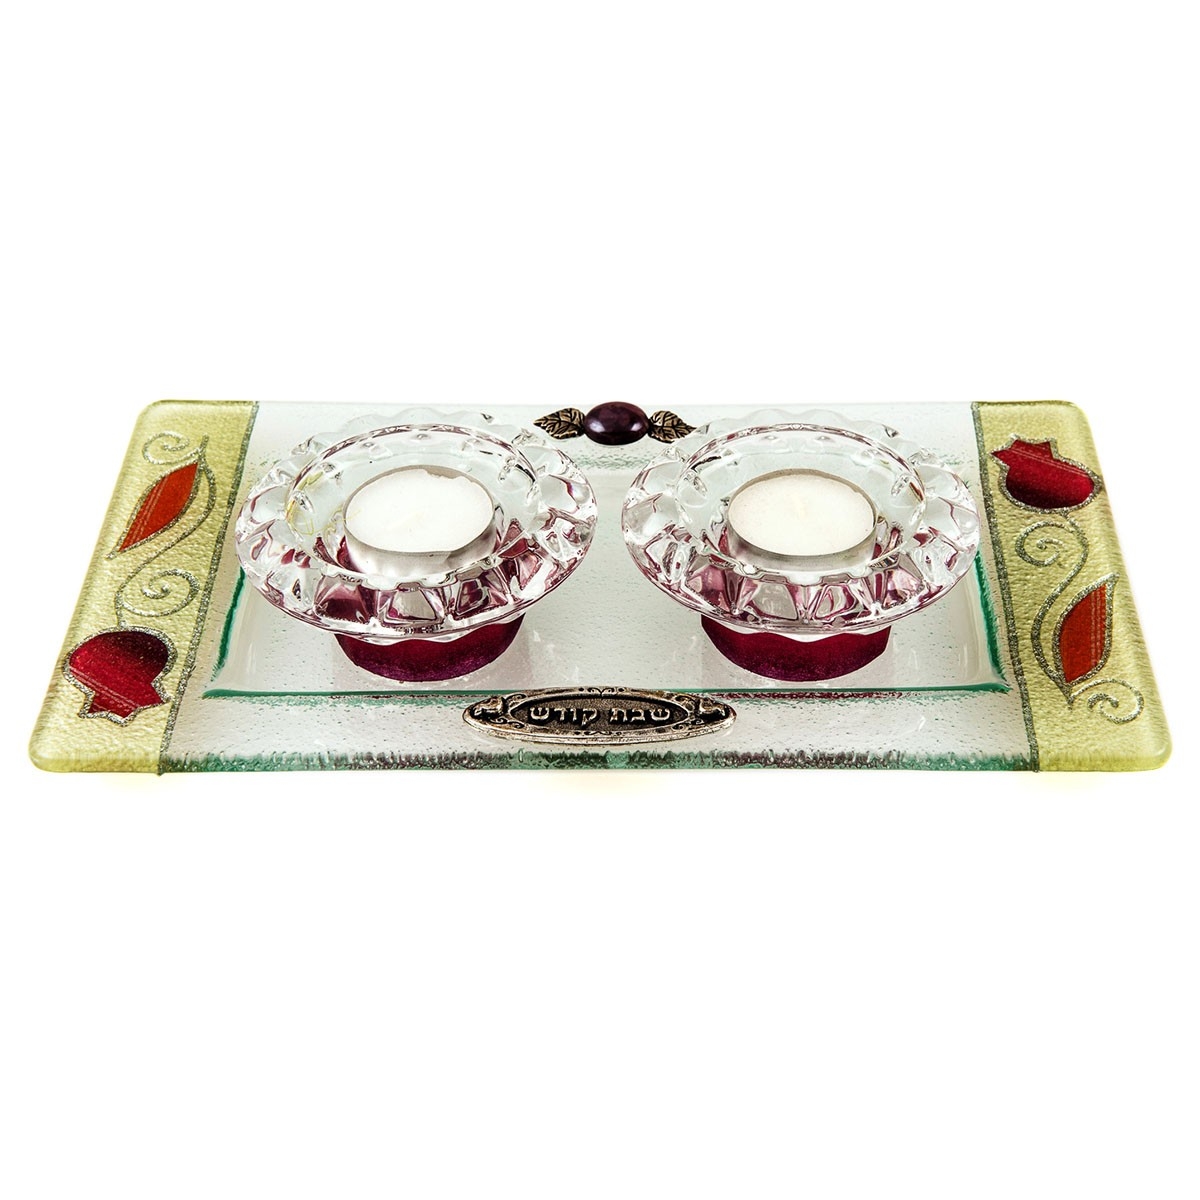 Lily Art Painted Glass Tealight Candleholders with Matching Tray (Red Pomegranates) - 1